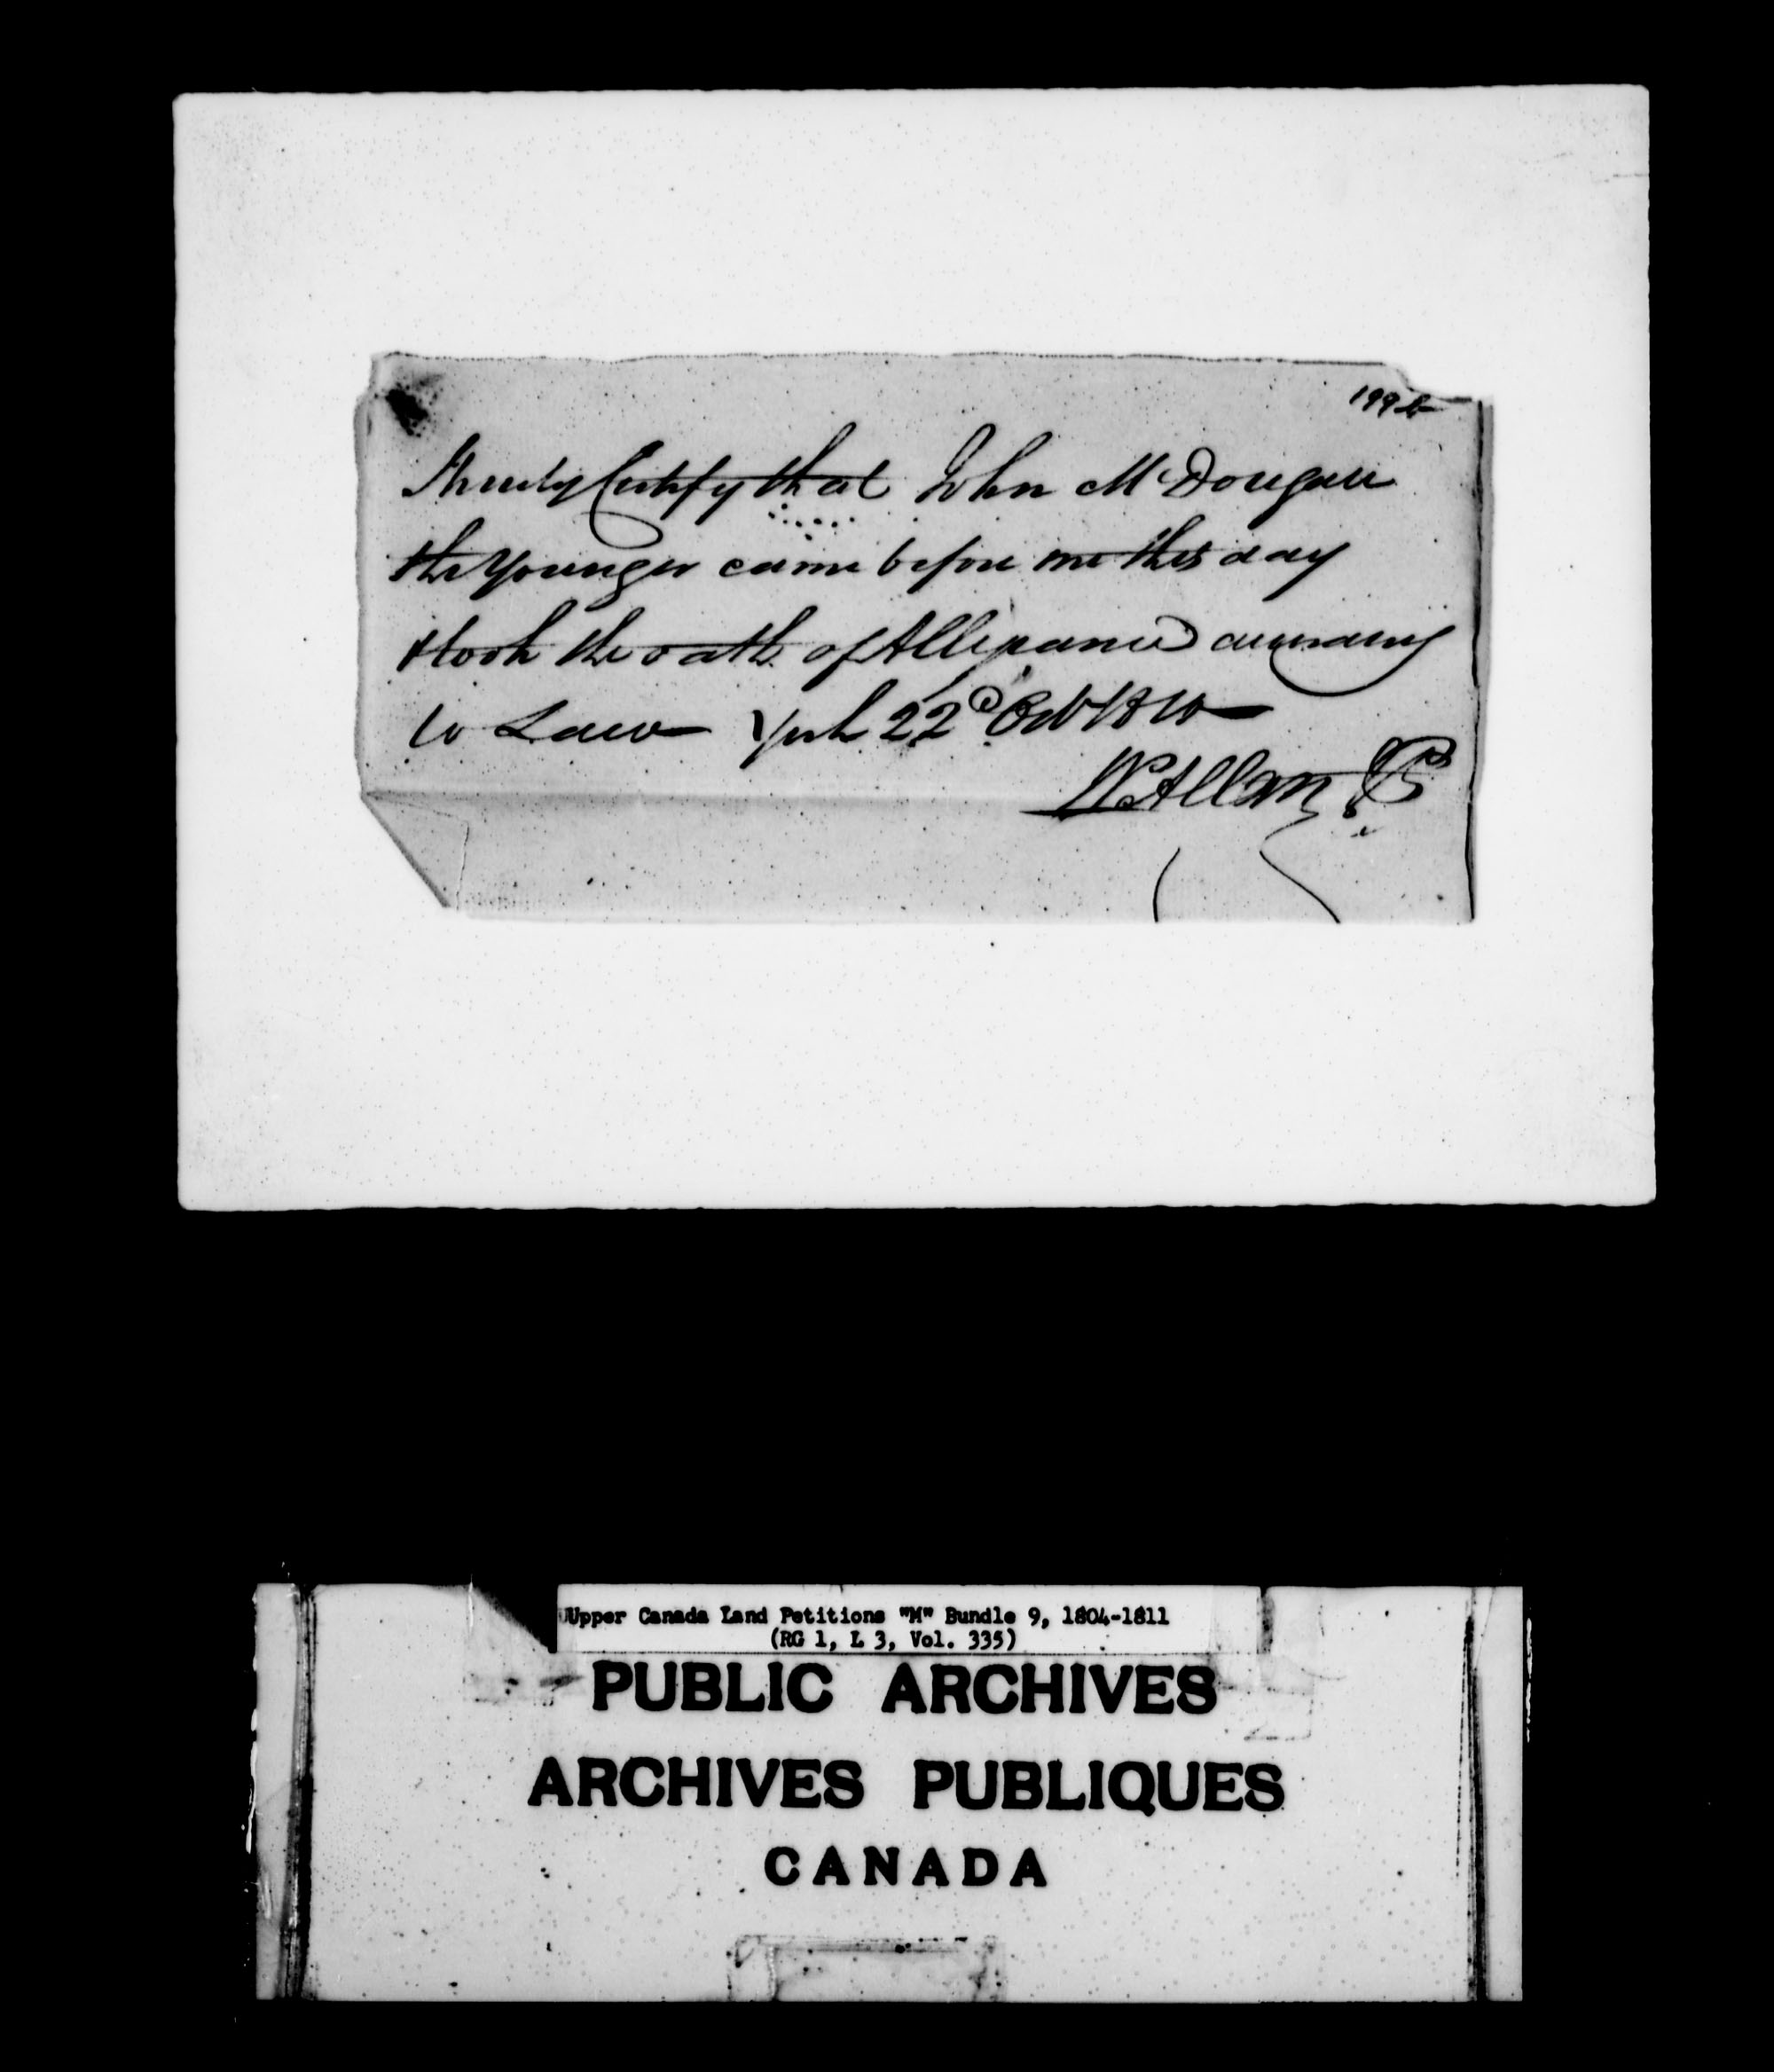 Title: Upper Canada Land Petitions (1763-1865) - Mikan Number: 205131 - Microform: c-2197